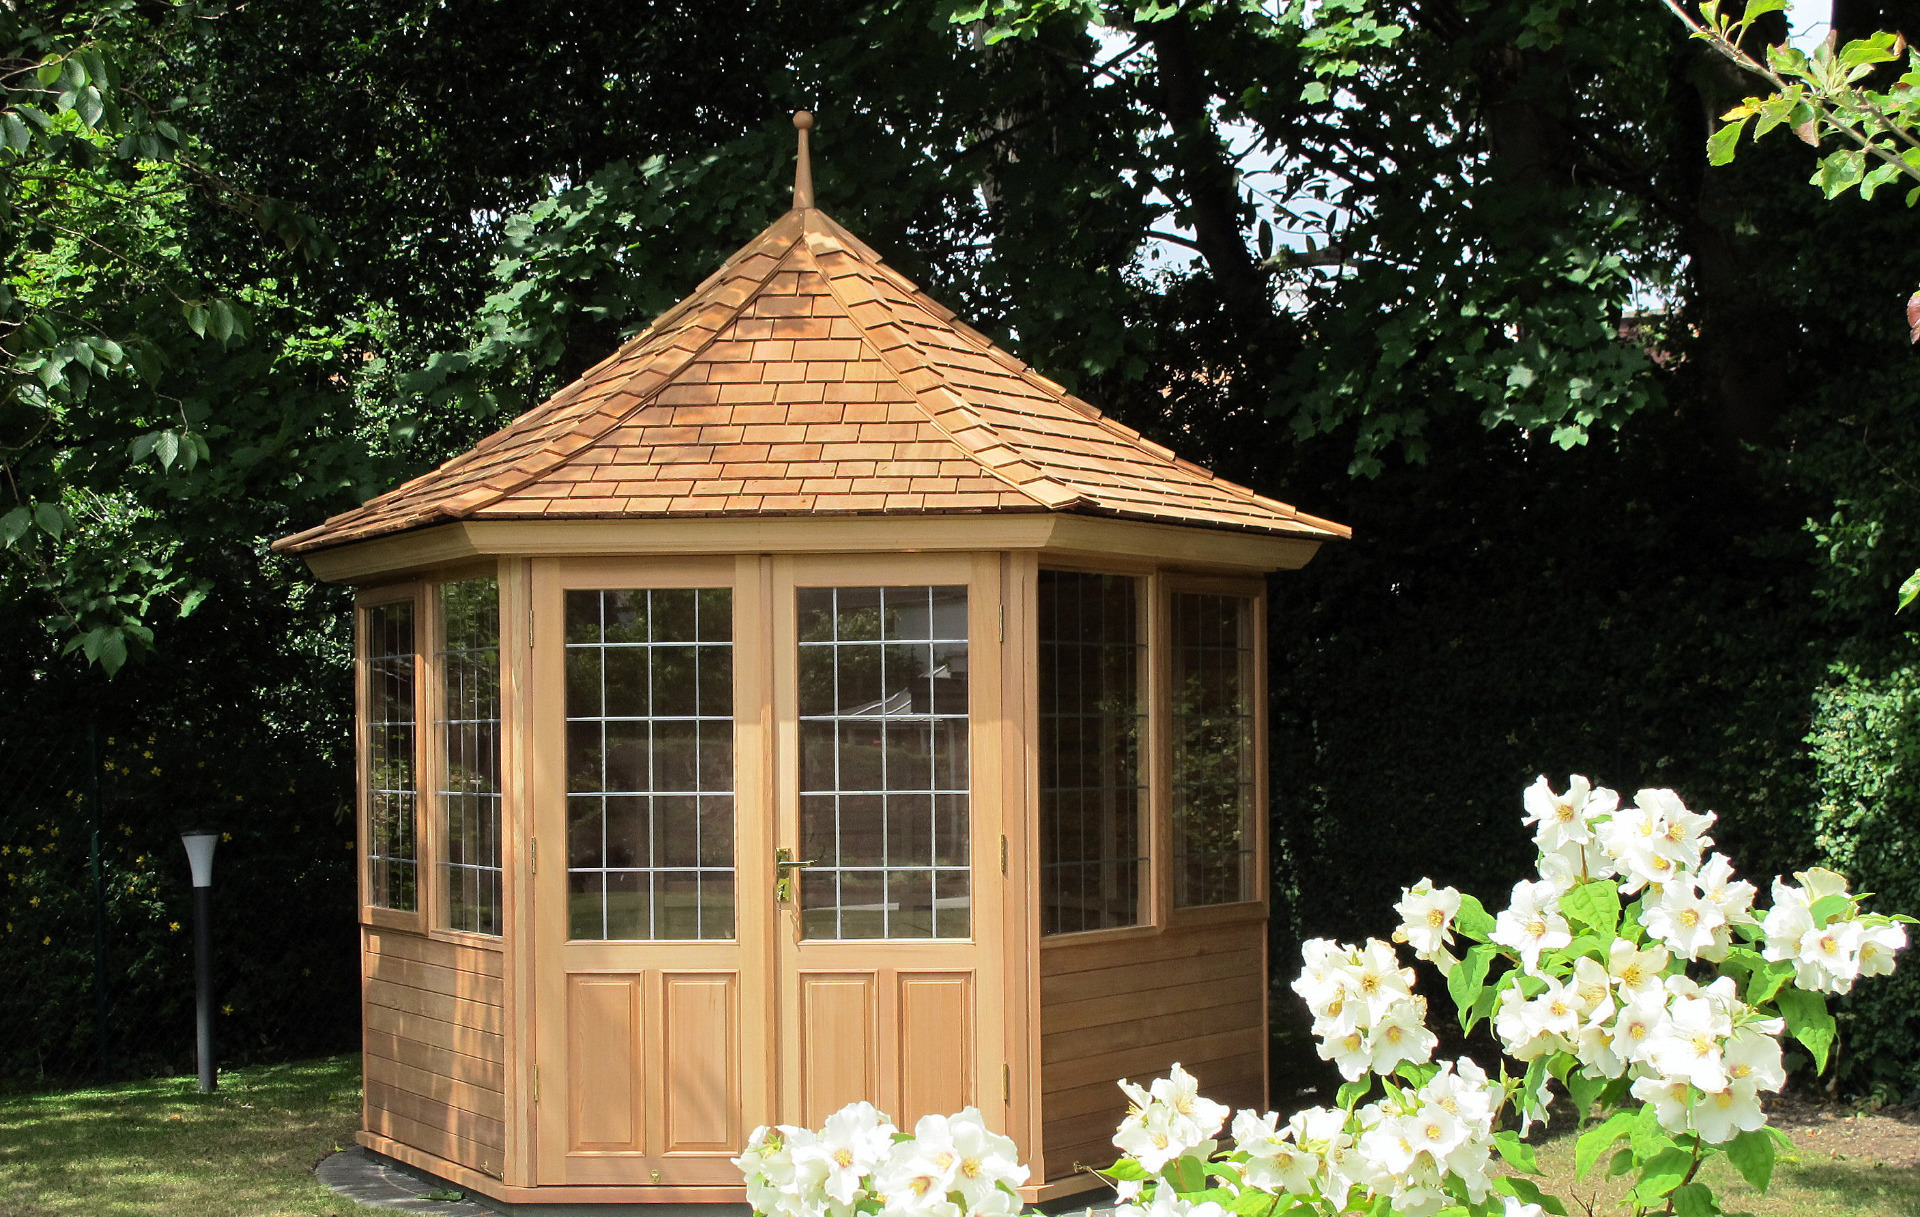 Bespoke Traditional Timber Summerhouses & Garden Rooms now on sale , call 087-2306 128 for details